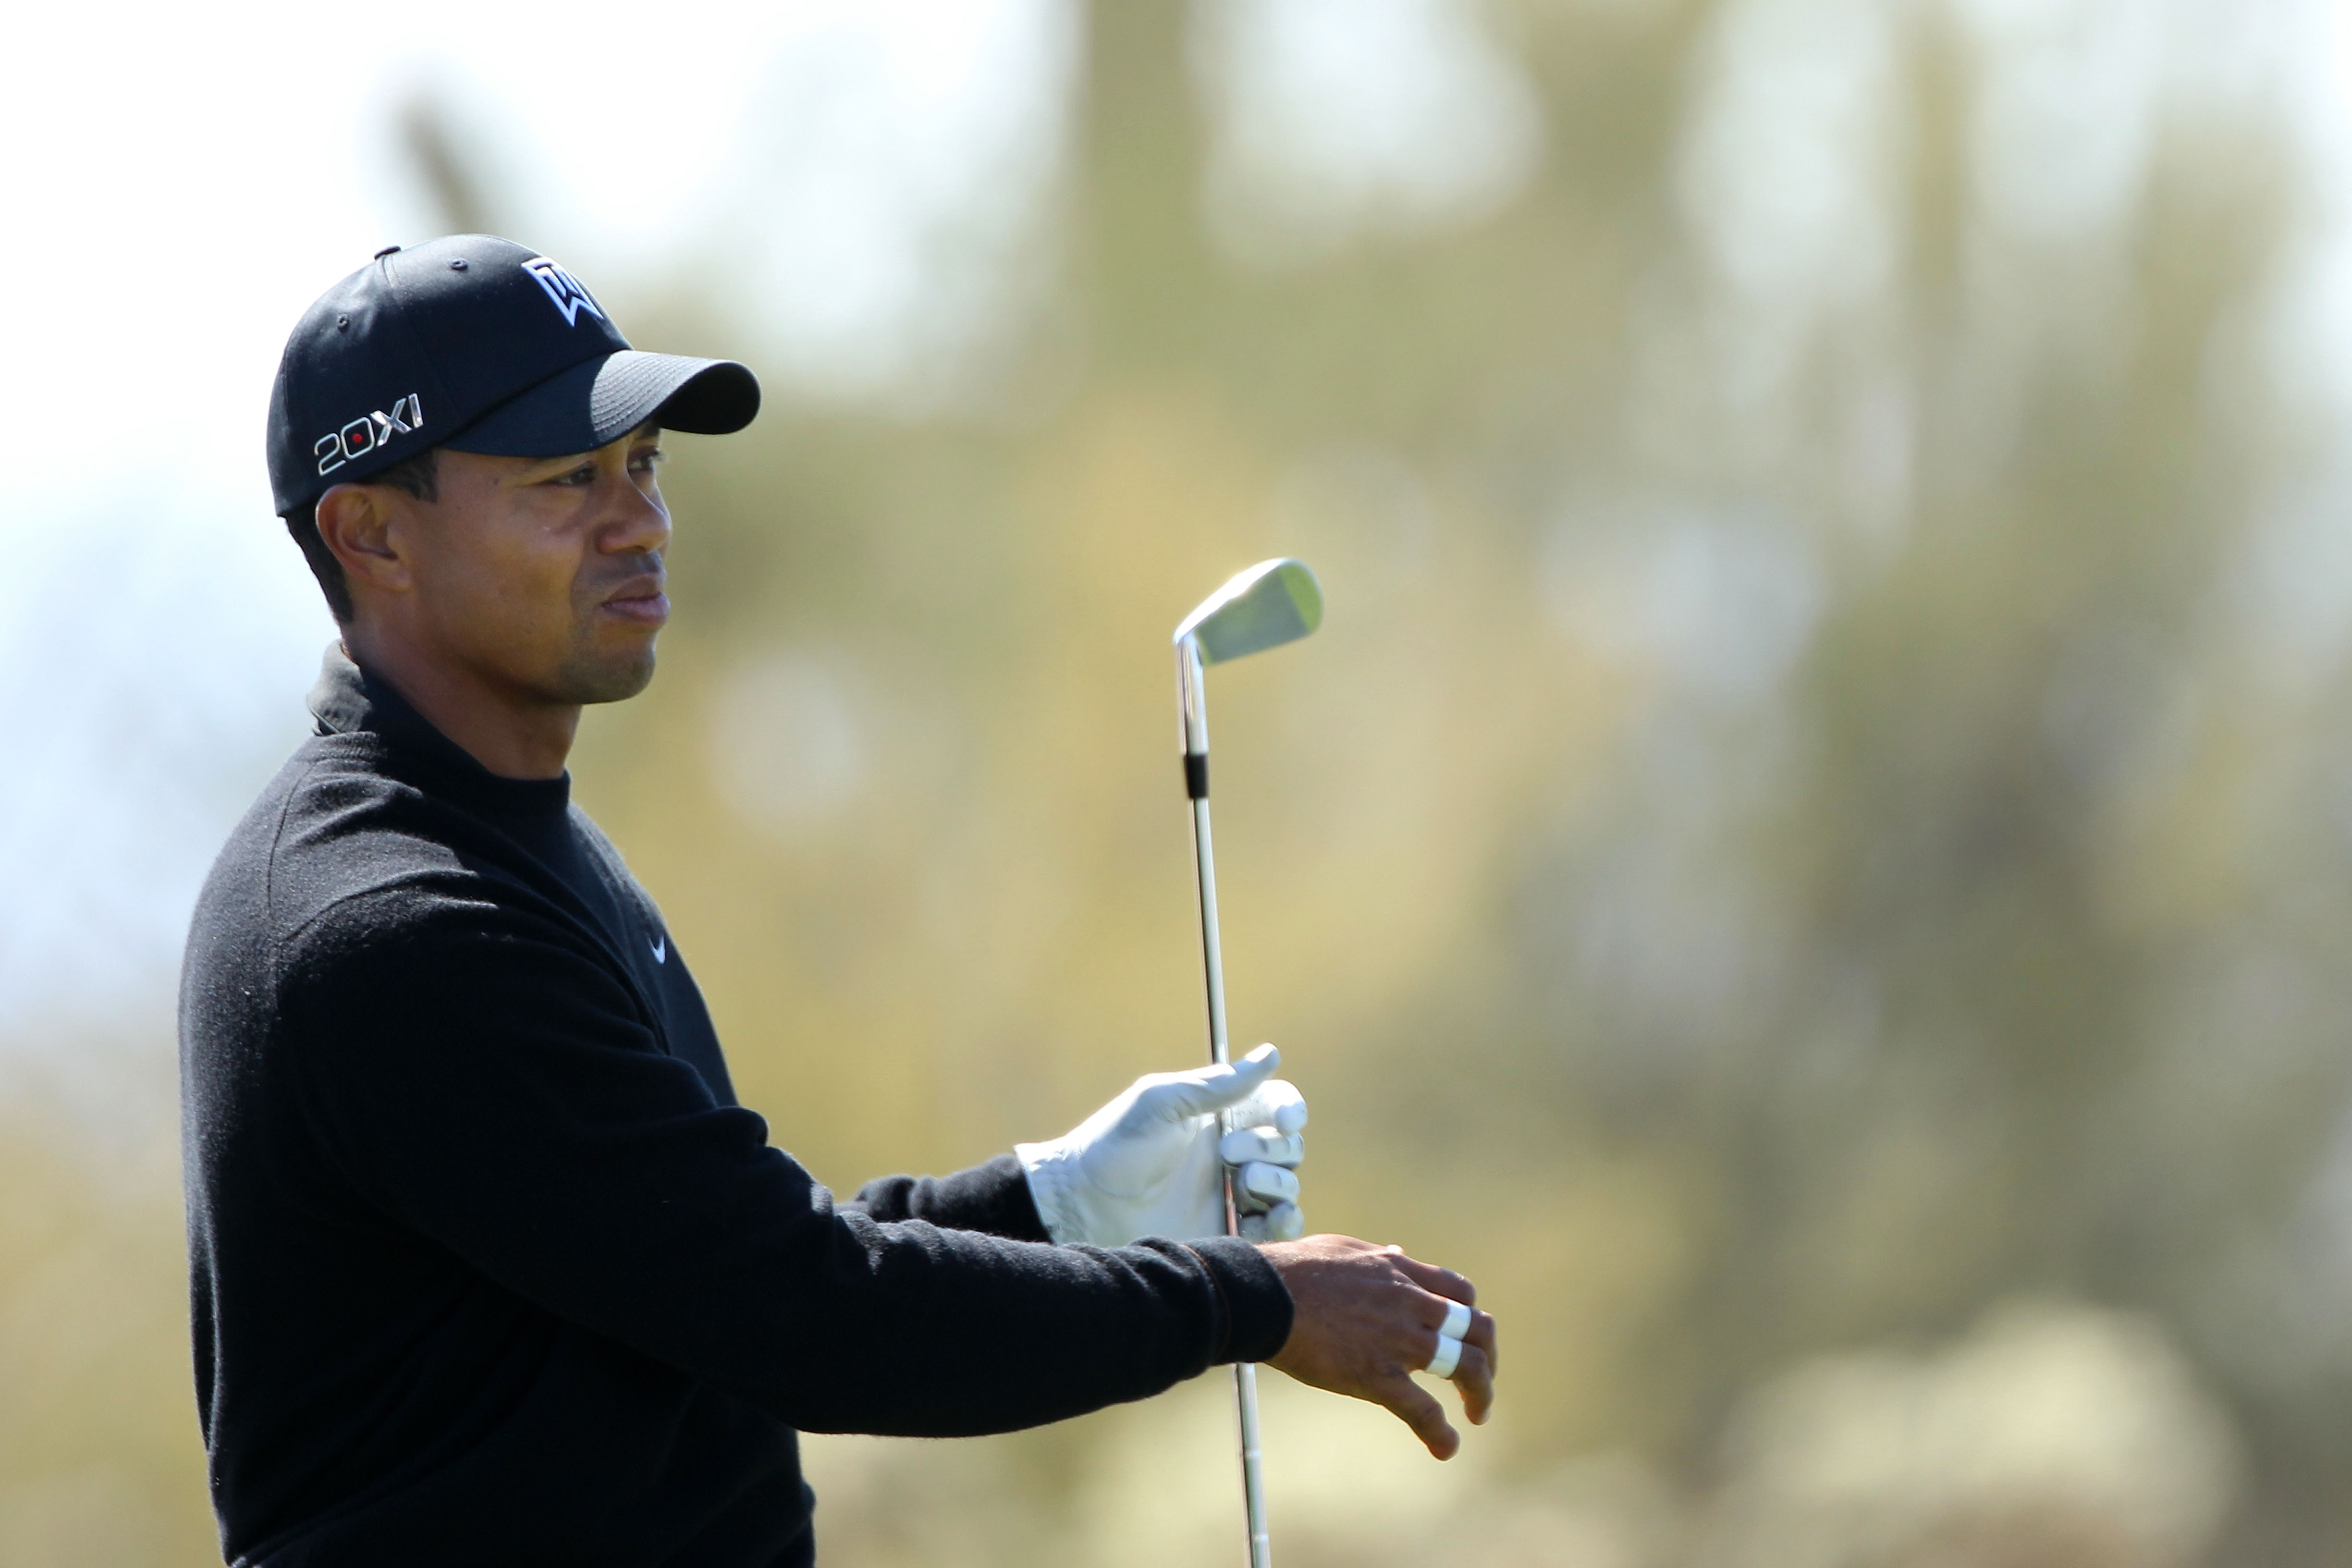 MARANA, AZ - FEBRUARY 23:  Tiger Woods reacts to his shot during the first round of the Accenture Match Play Championship at the Ritz-Carlton Golf Club on February 23, 2011 in Marana, Arizona.  (Photo by Andy Lyons/Getty Images)